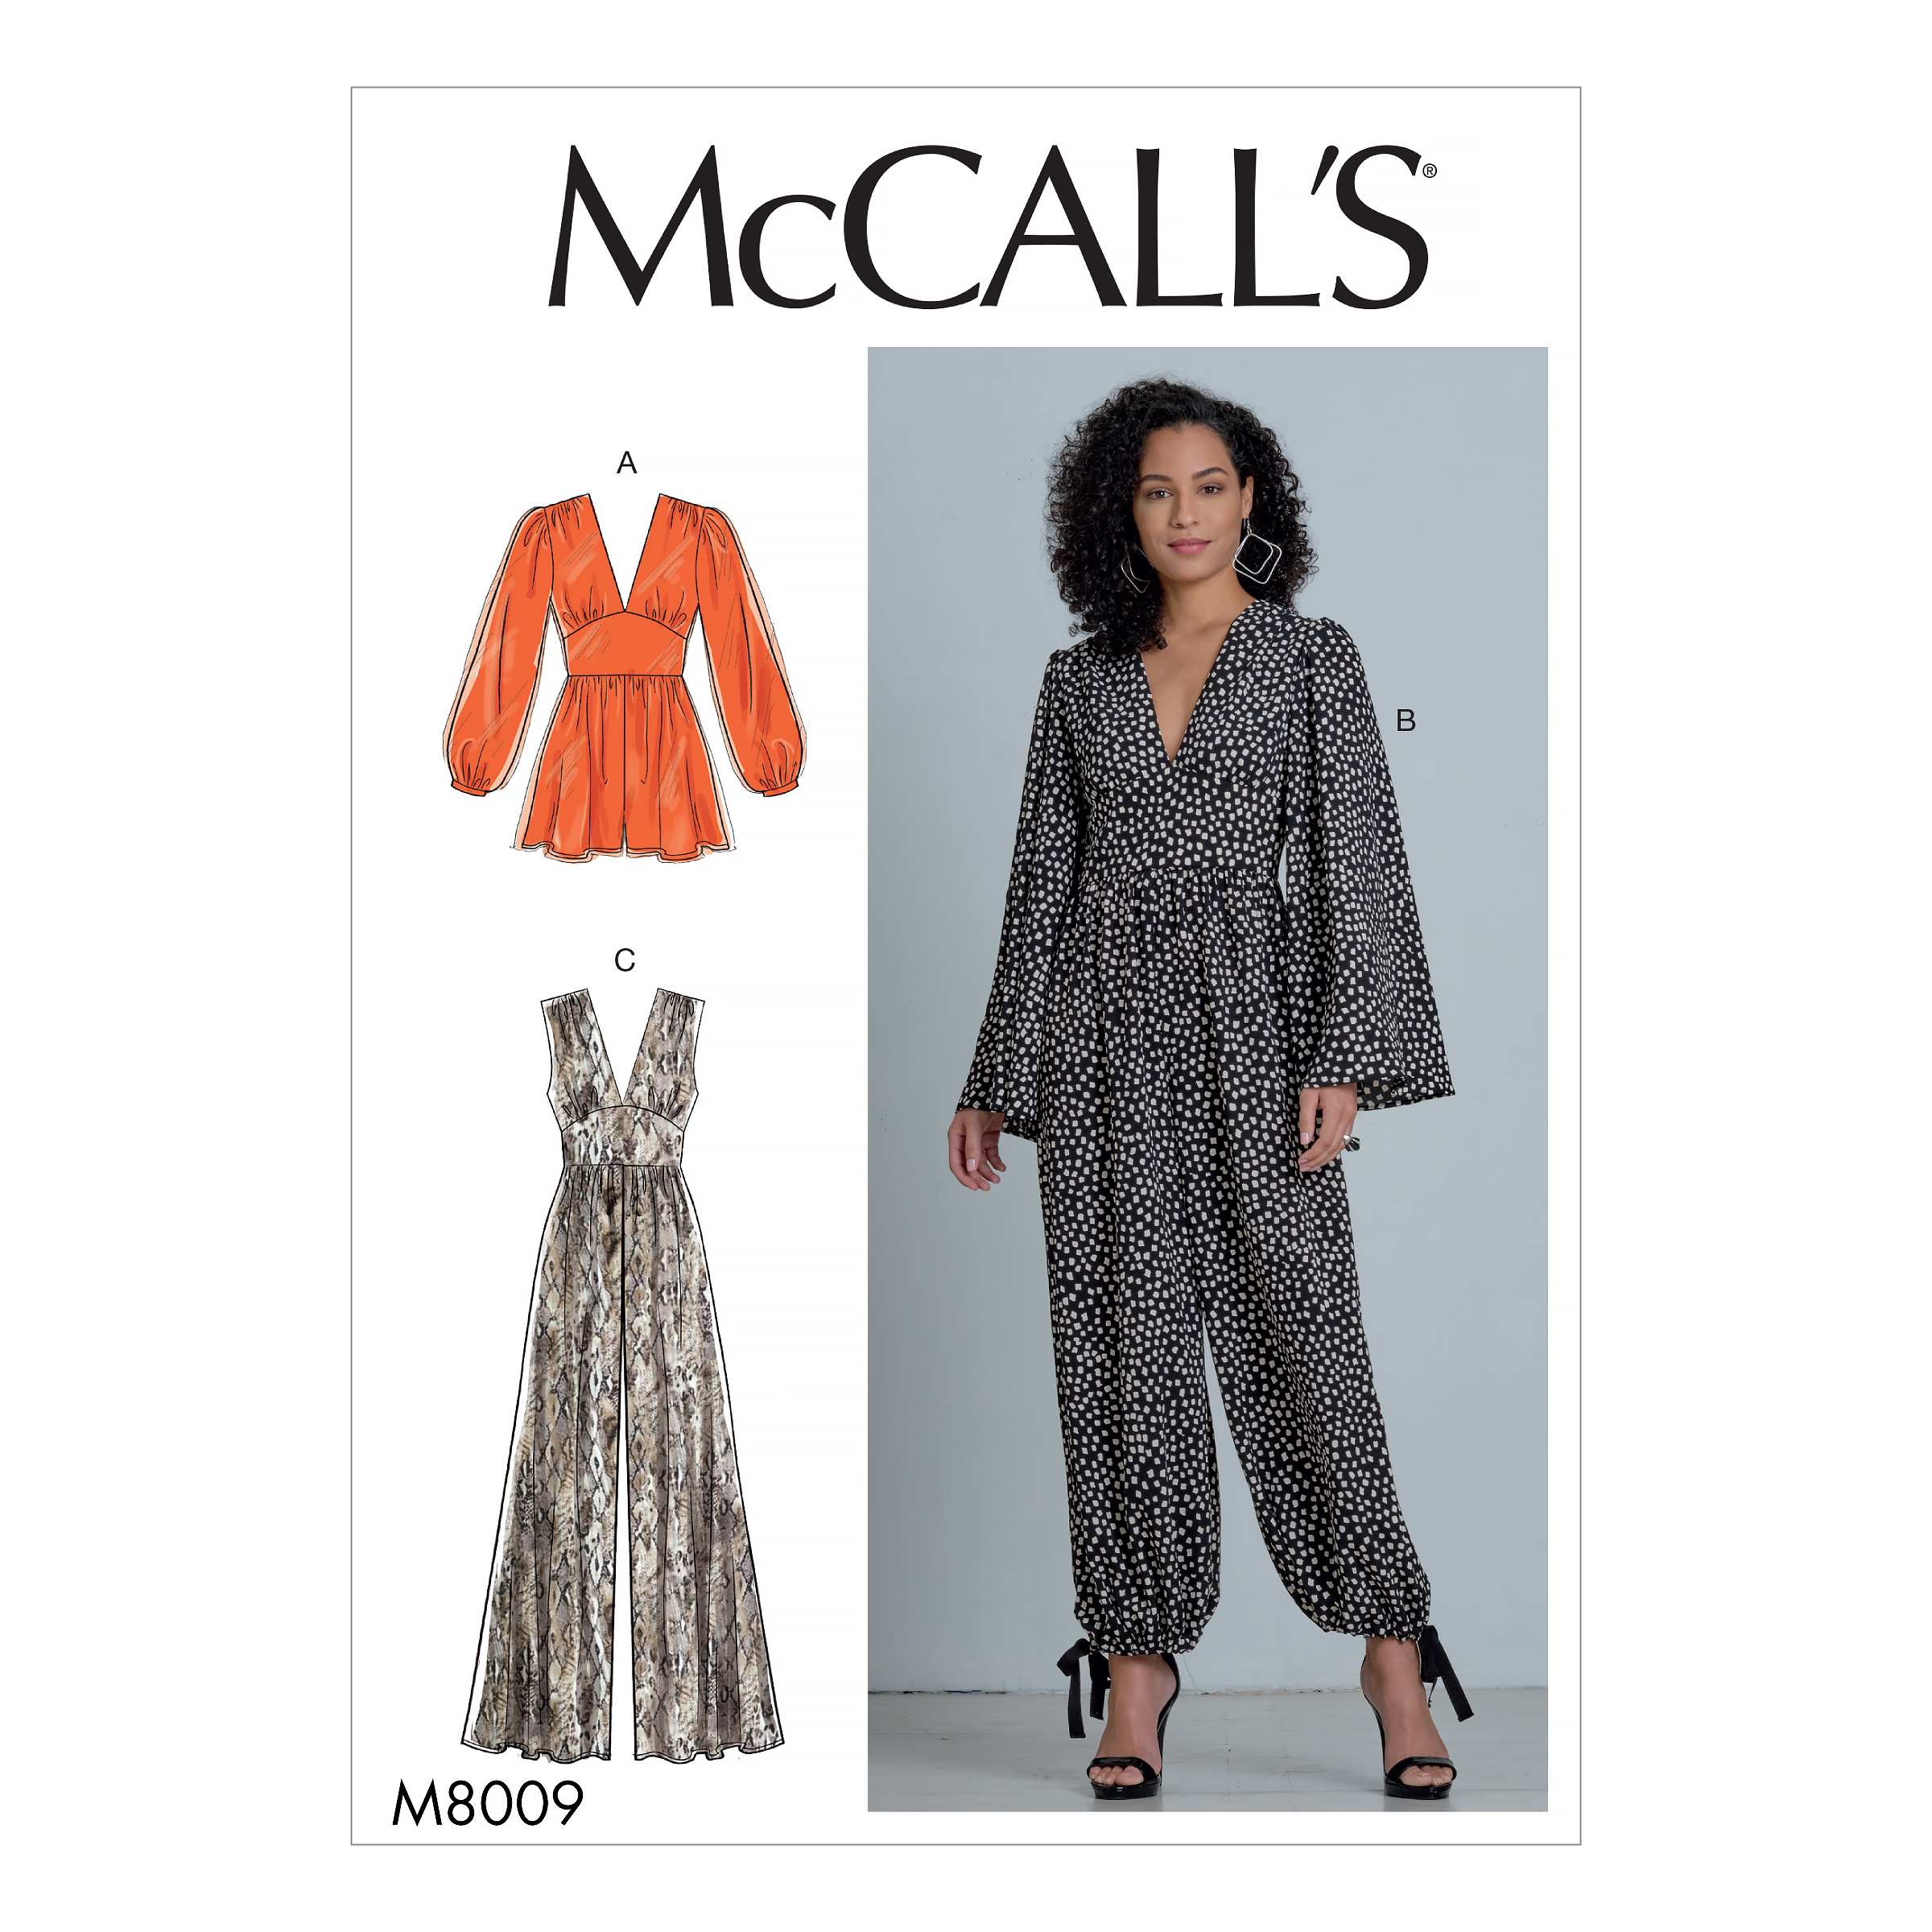 https://images.patternreview.com/sewing/patterns/mccall/2019/8009/8009.jpg